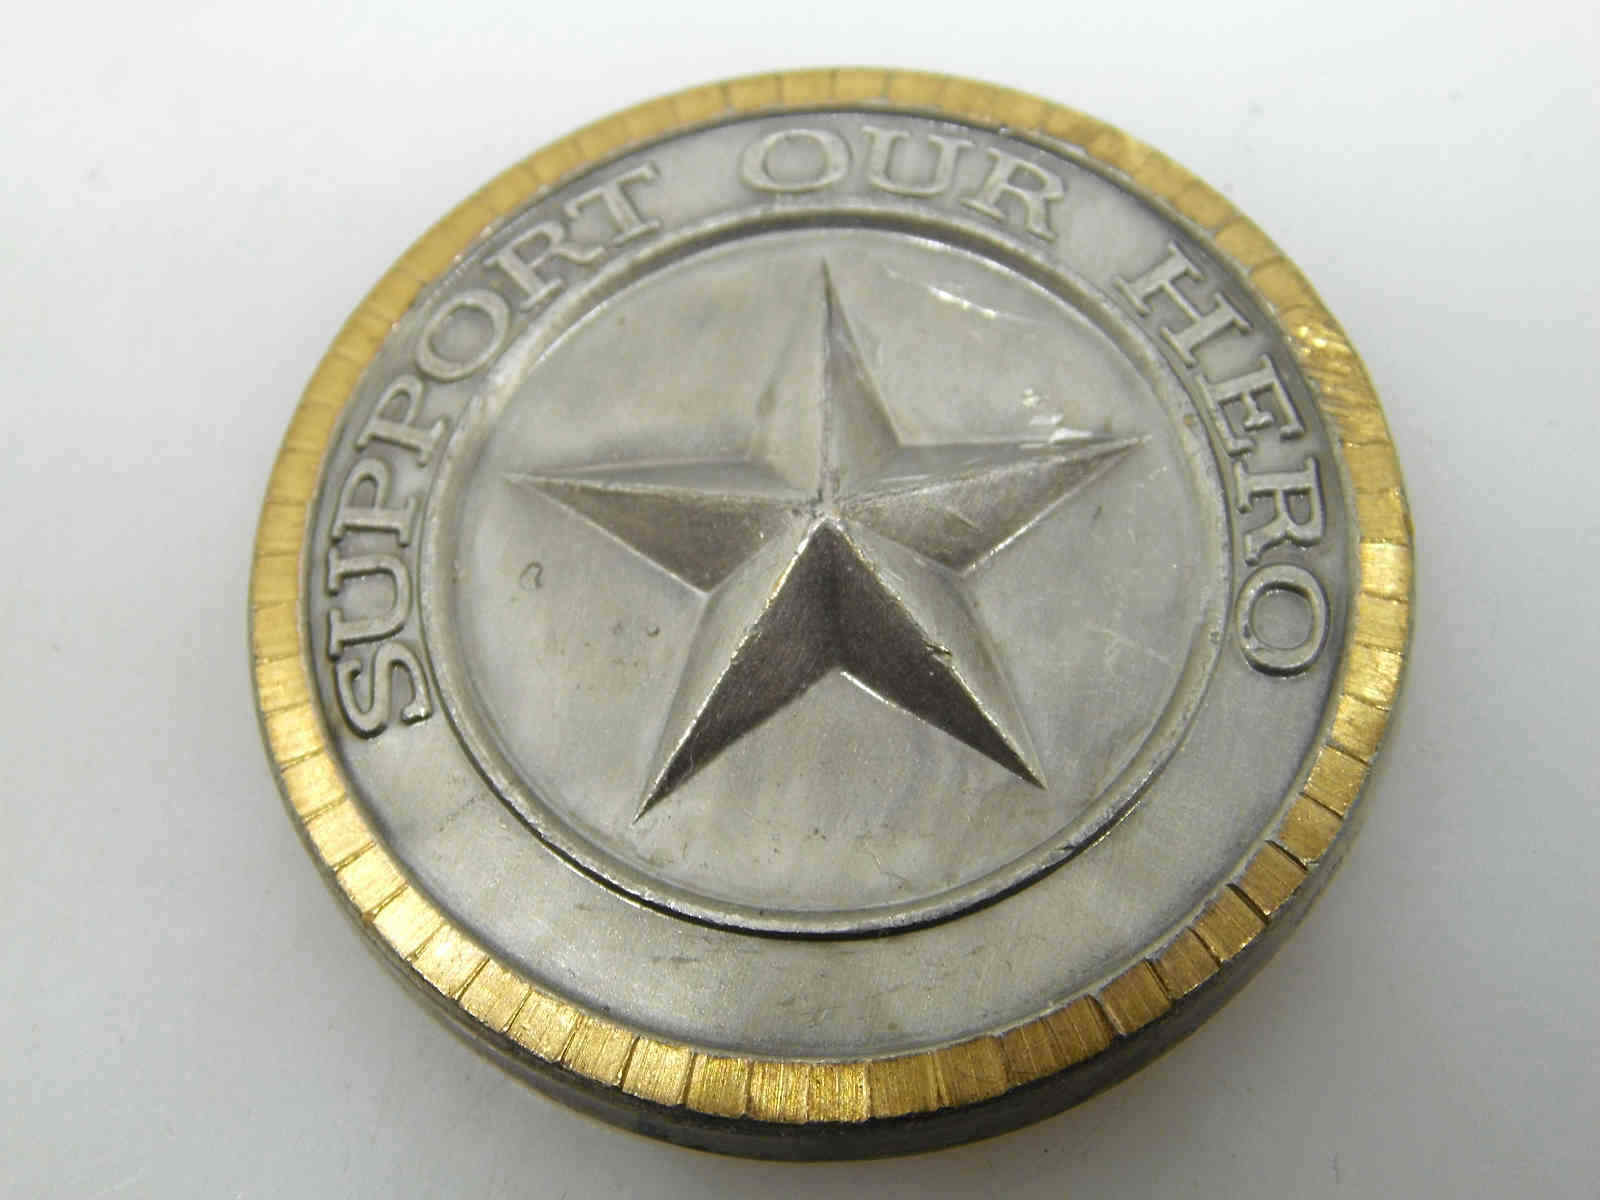 SUPPORT OUR HERO IN MEMORY OF OUR FORMER HERO CHALLENGE COIN